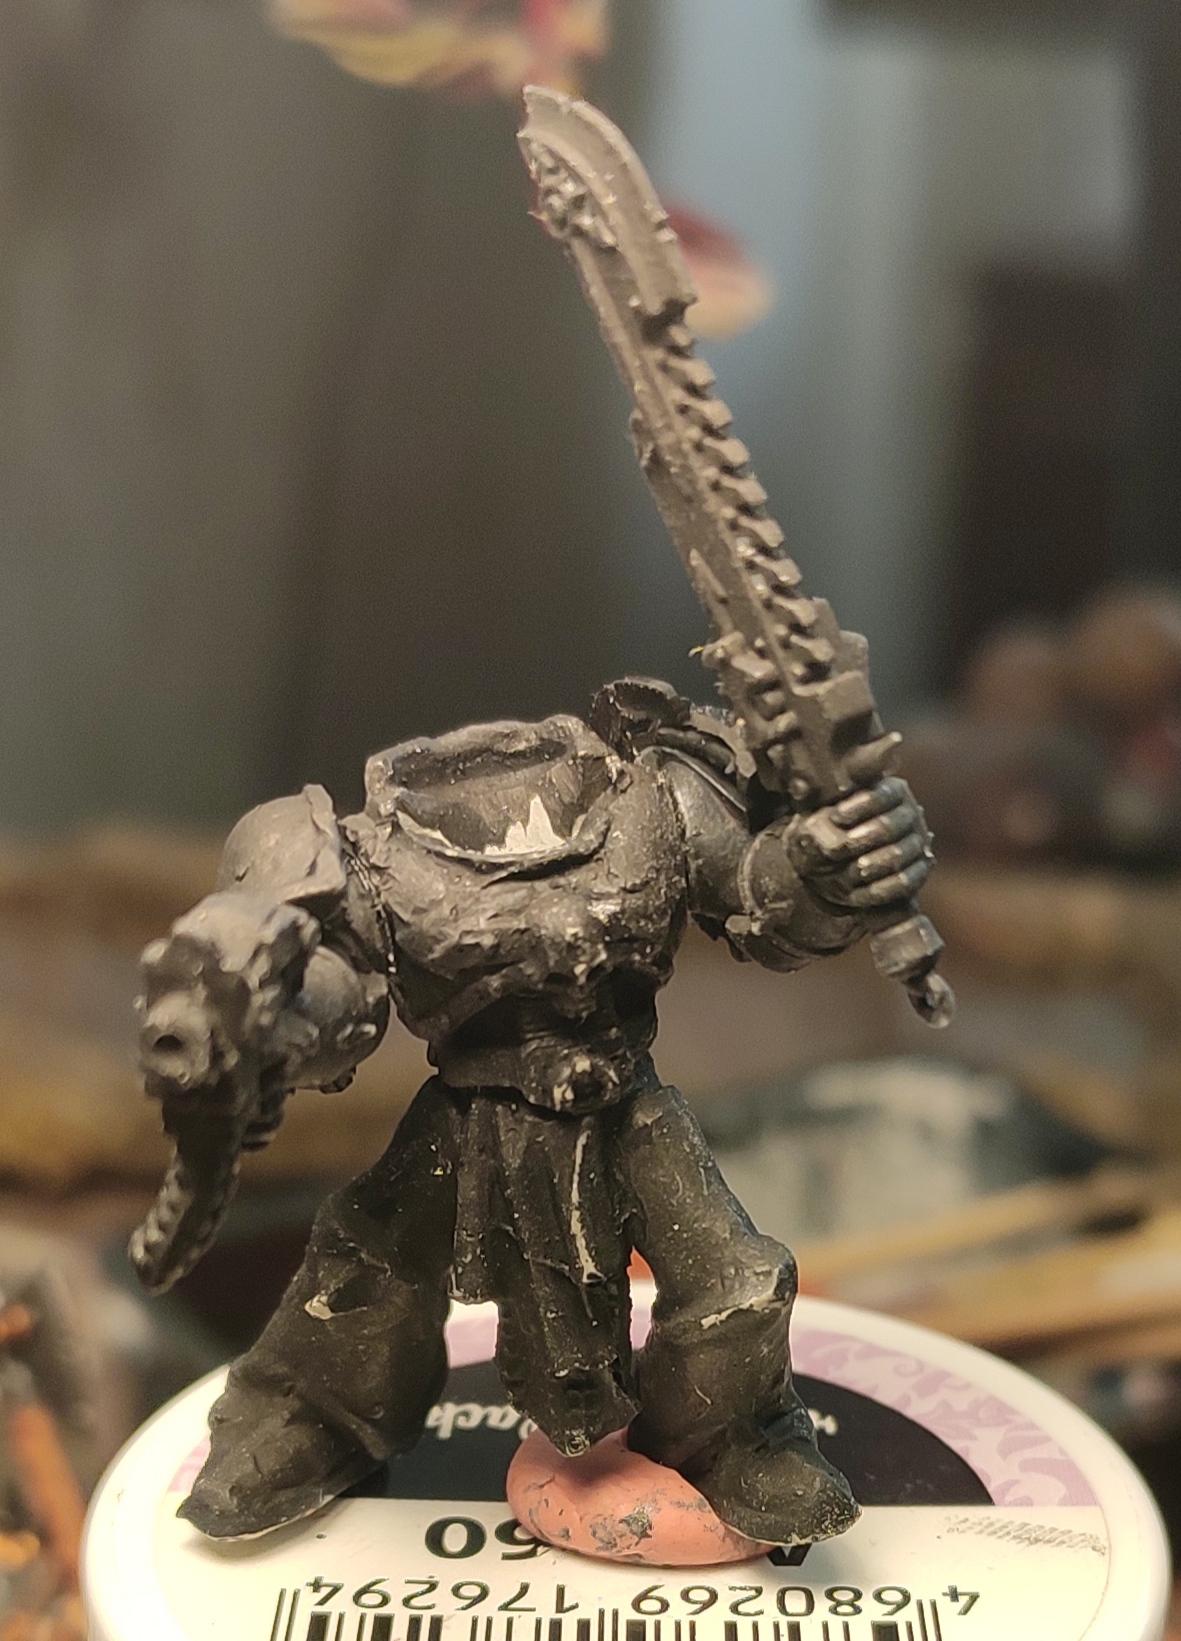 Bolt Pistol, Casting, Chainsword, Chaos, Chaos Space Marines, Conversion, Epoxy, Heresy, Heretic Astartes, Infantry, Kitbash, Putty, Traitor Legions, Warhammer 40,000, Work In Progress